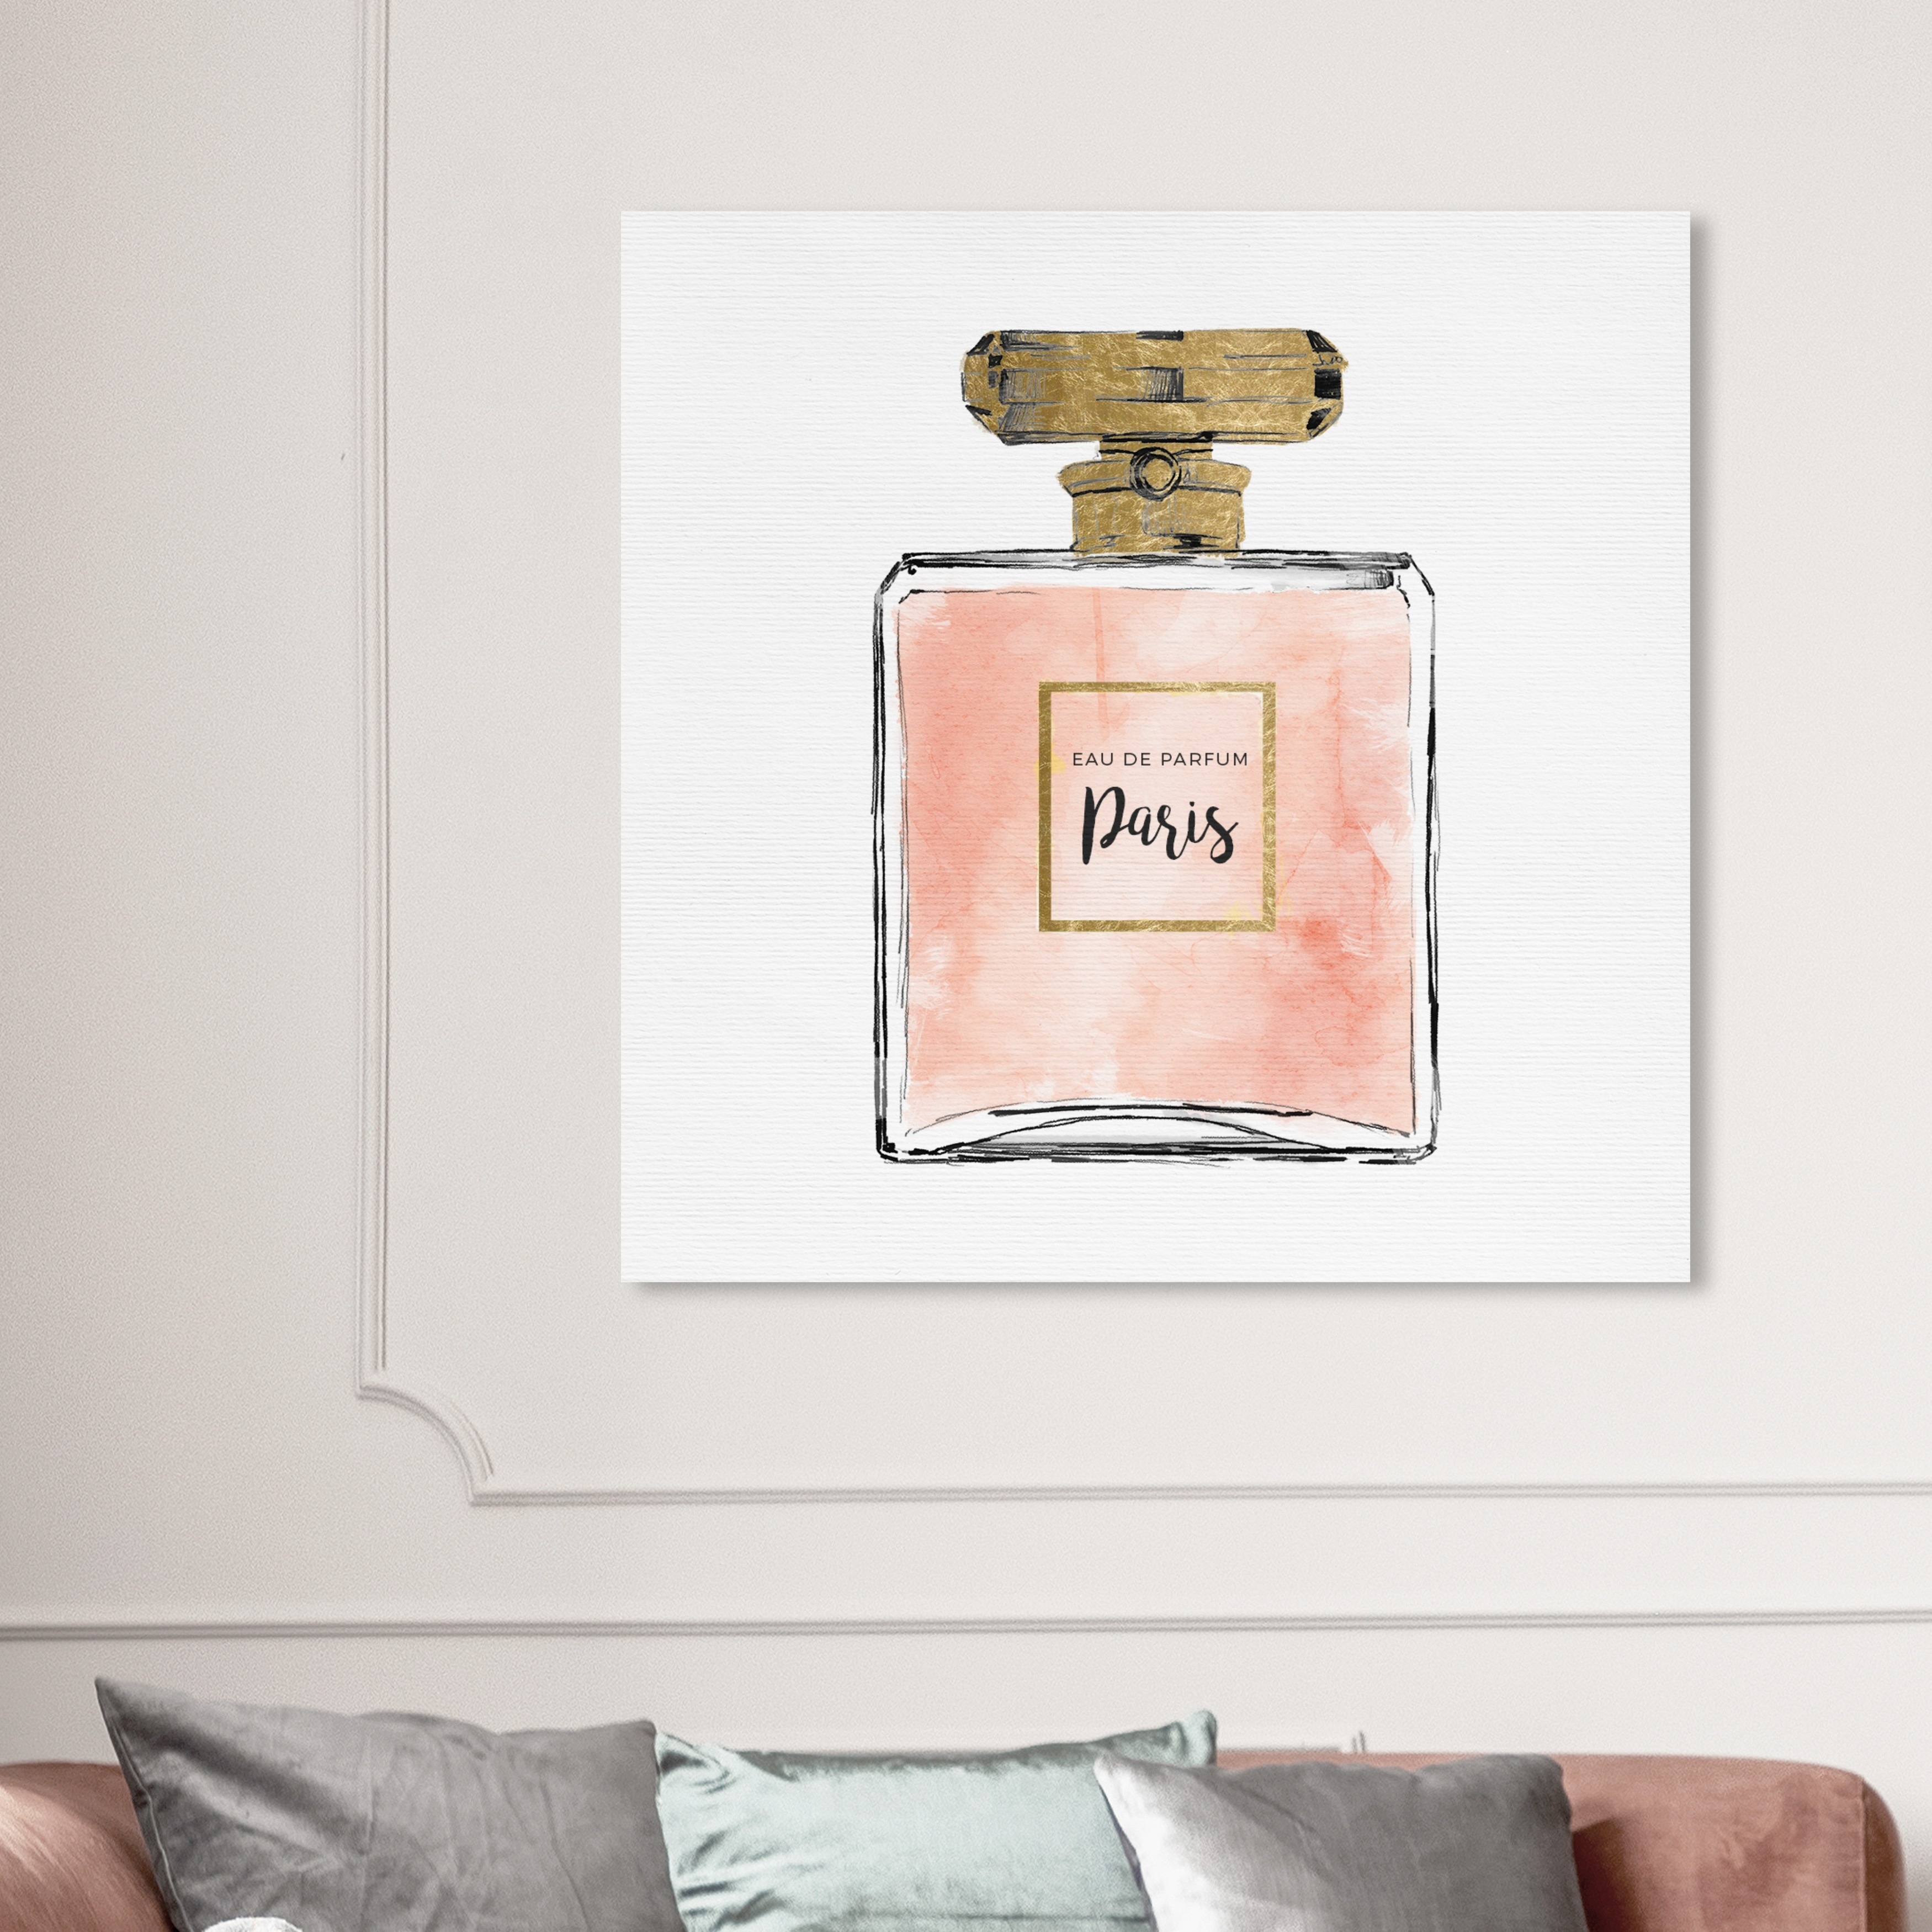 Oliver Gal 'Golden Perfume Collection' Glam Pink Wall Art Canvas Print -  Bed Bath & Beyond - 33075269